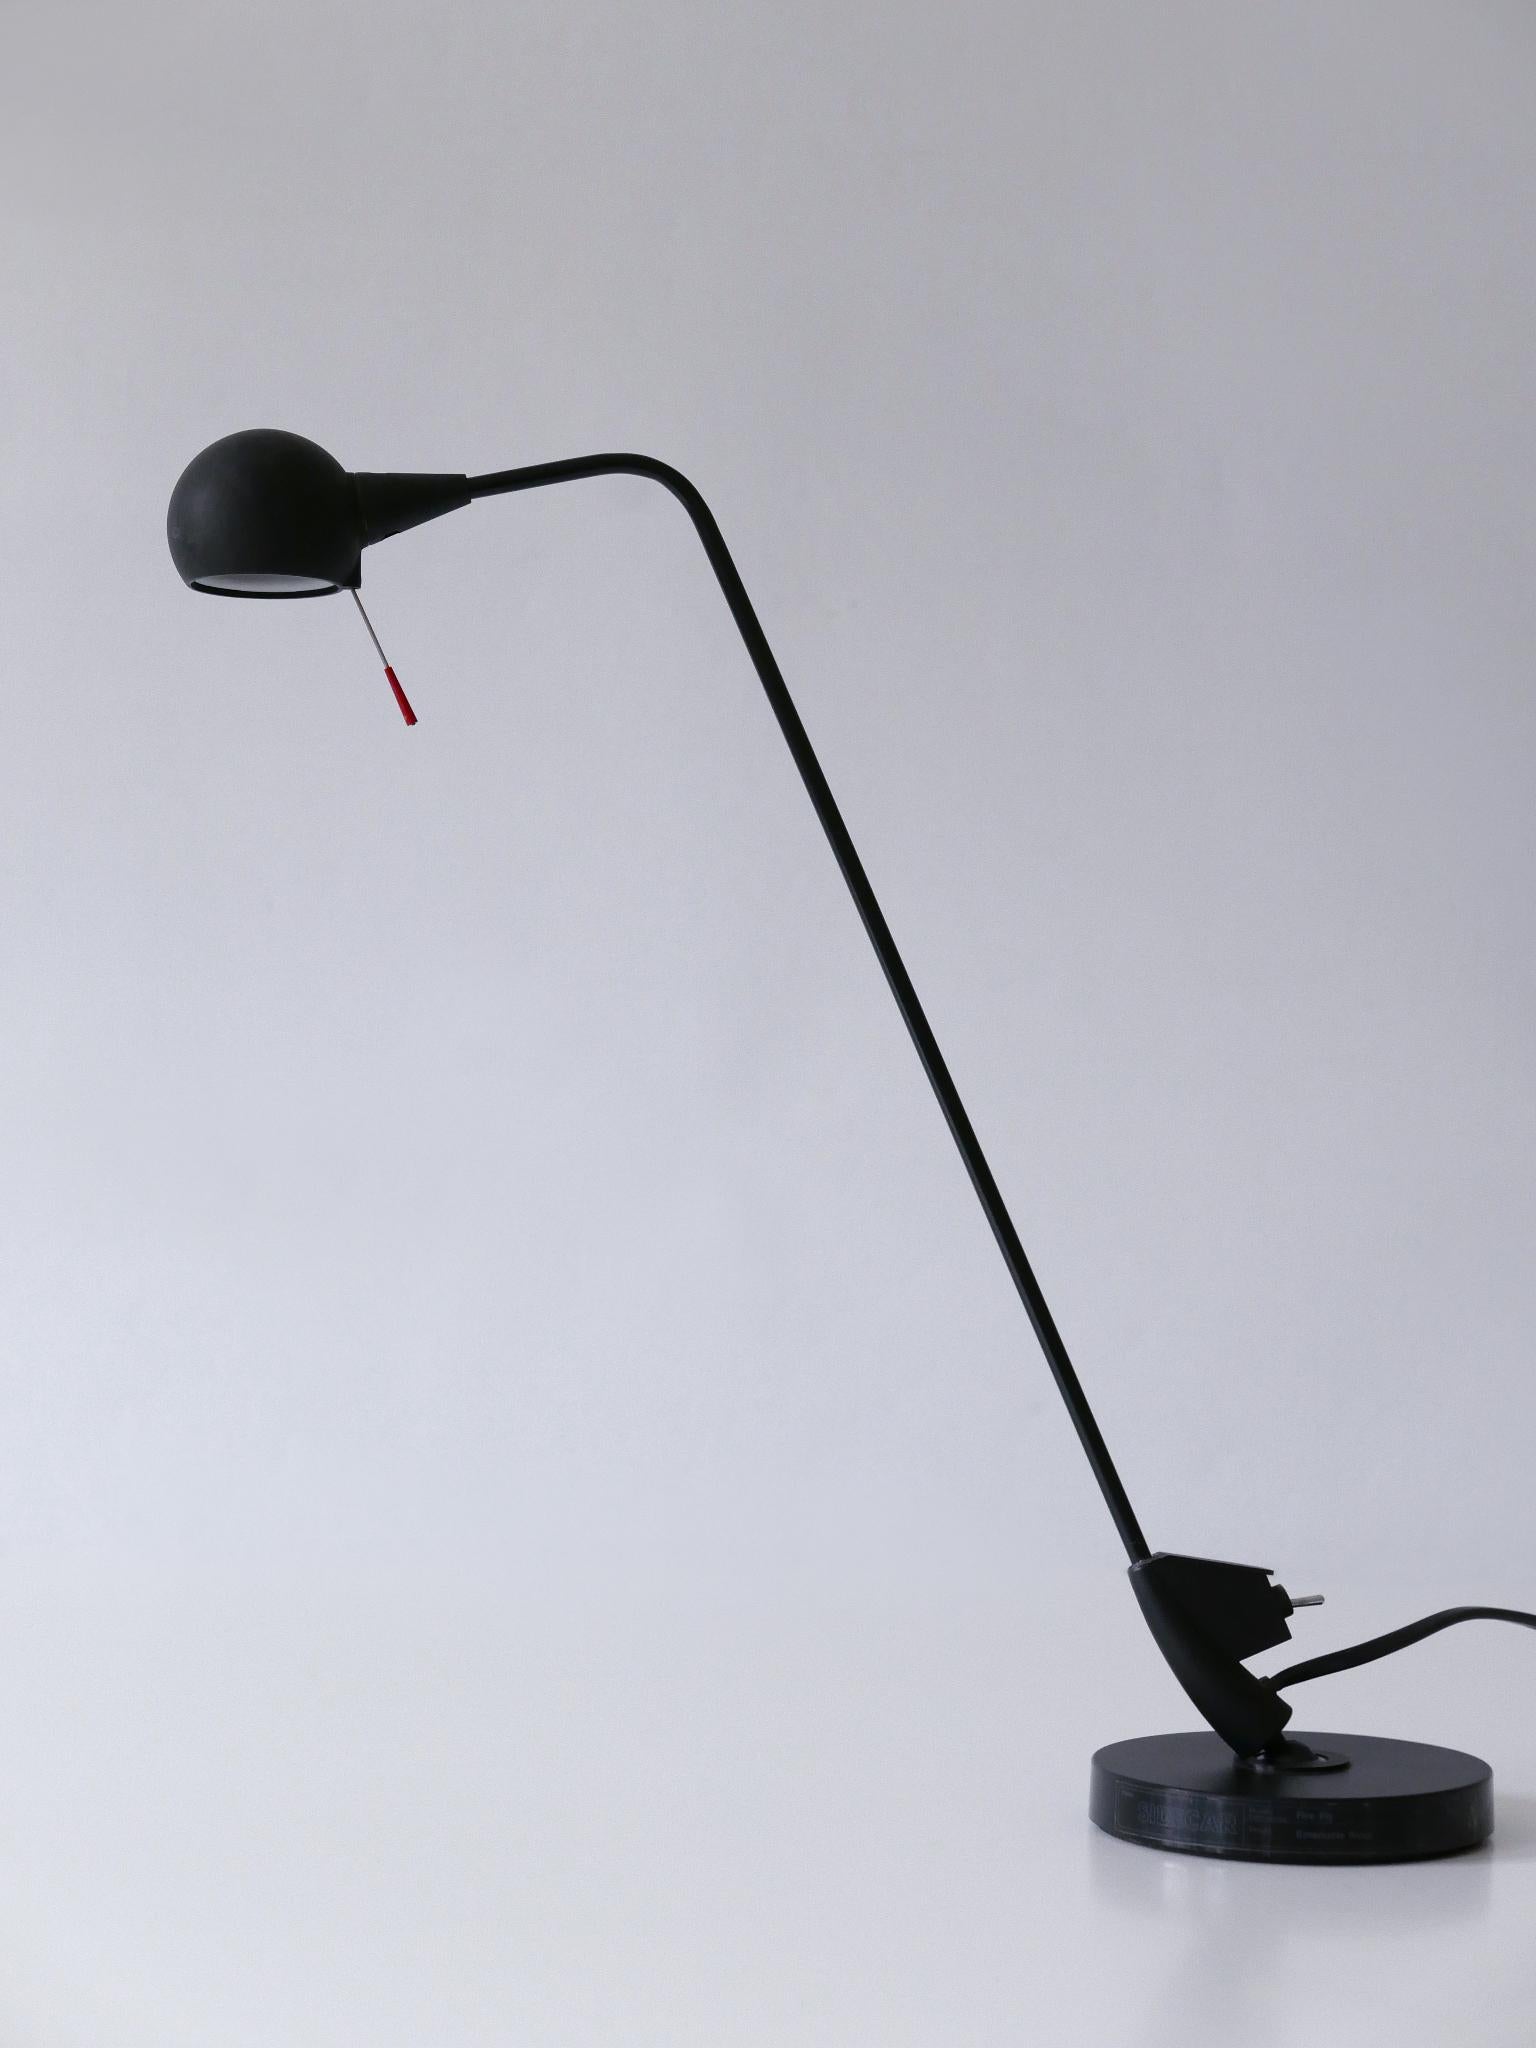 Adjustable Postmodern Table Lamp Fire Fly by Emanuele Ricci for Artemide 1989 For Sale 7